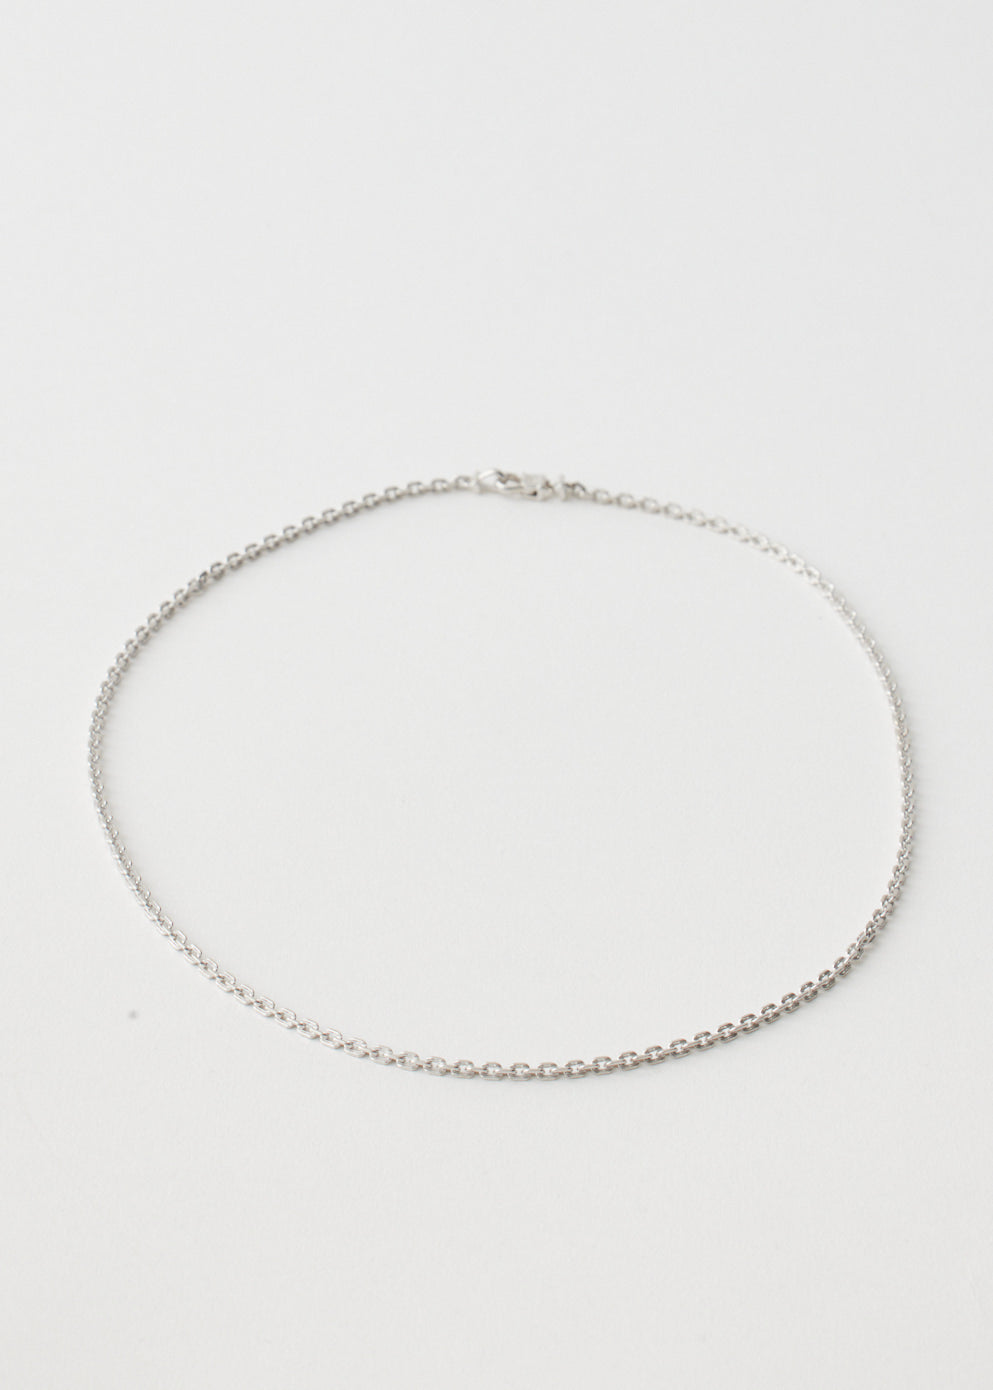 Anker Chain Necklace 20.5"